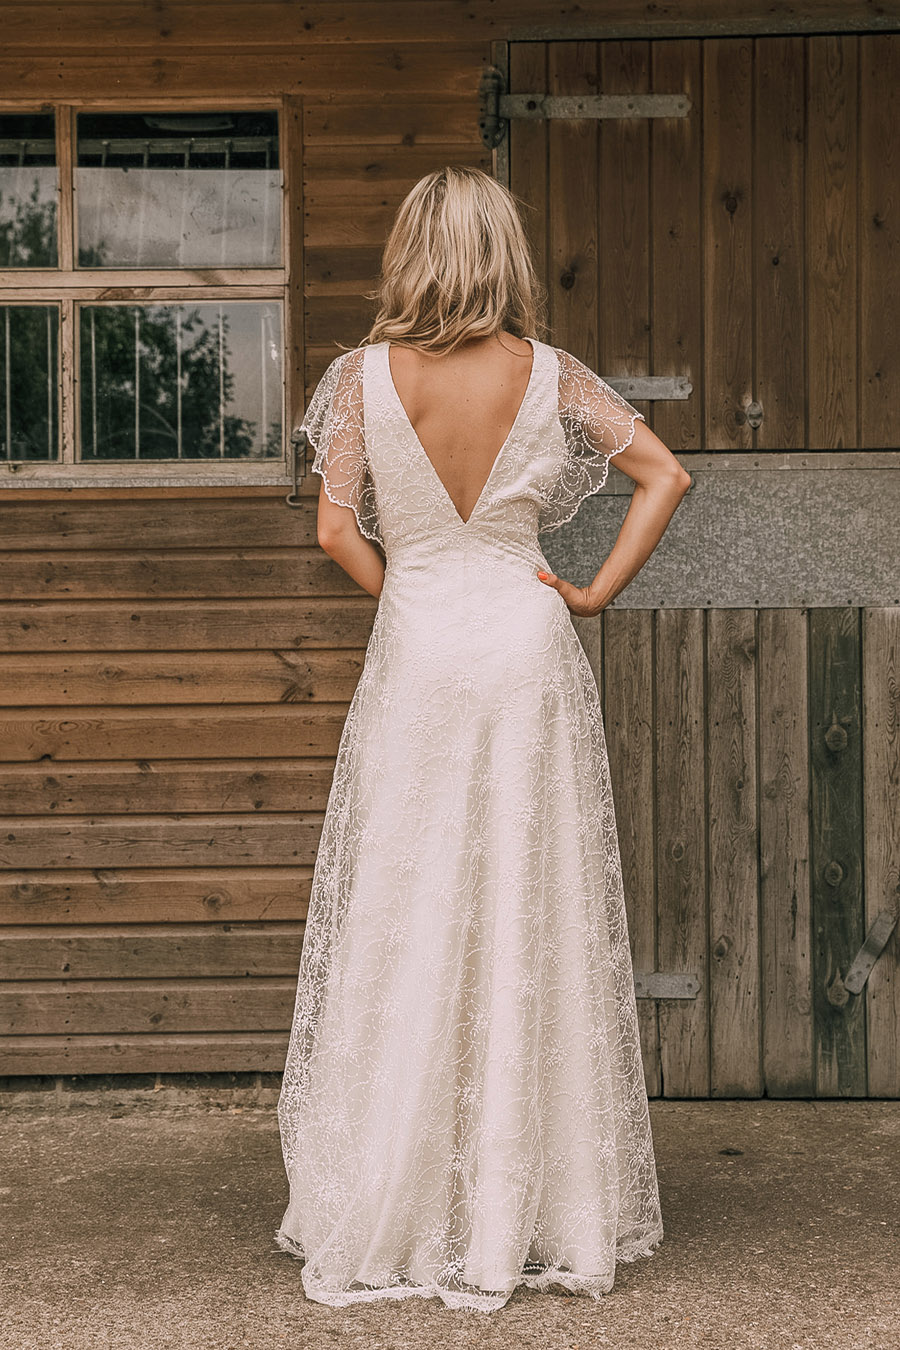 Belle and Bunty cowgirl wedding dress collection 2019 London (2)